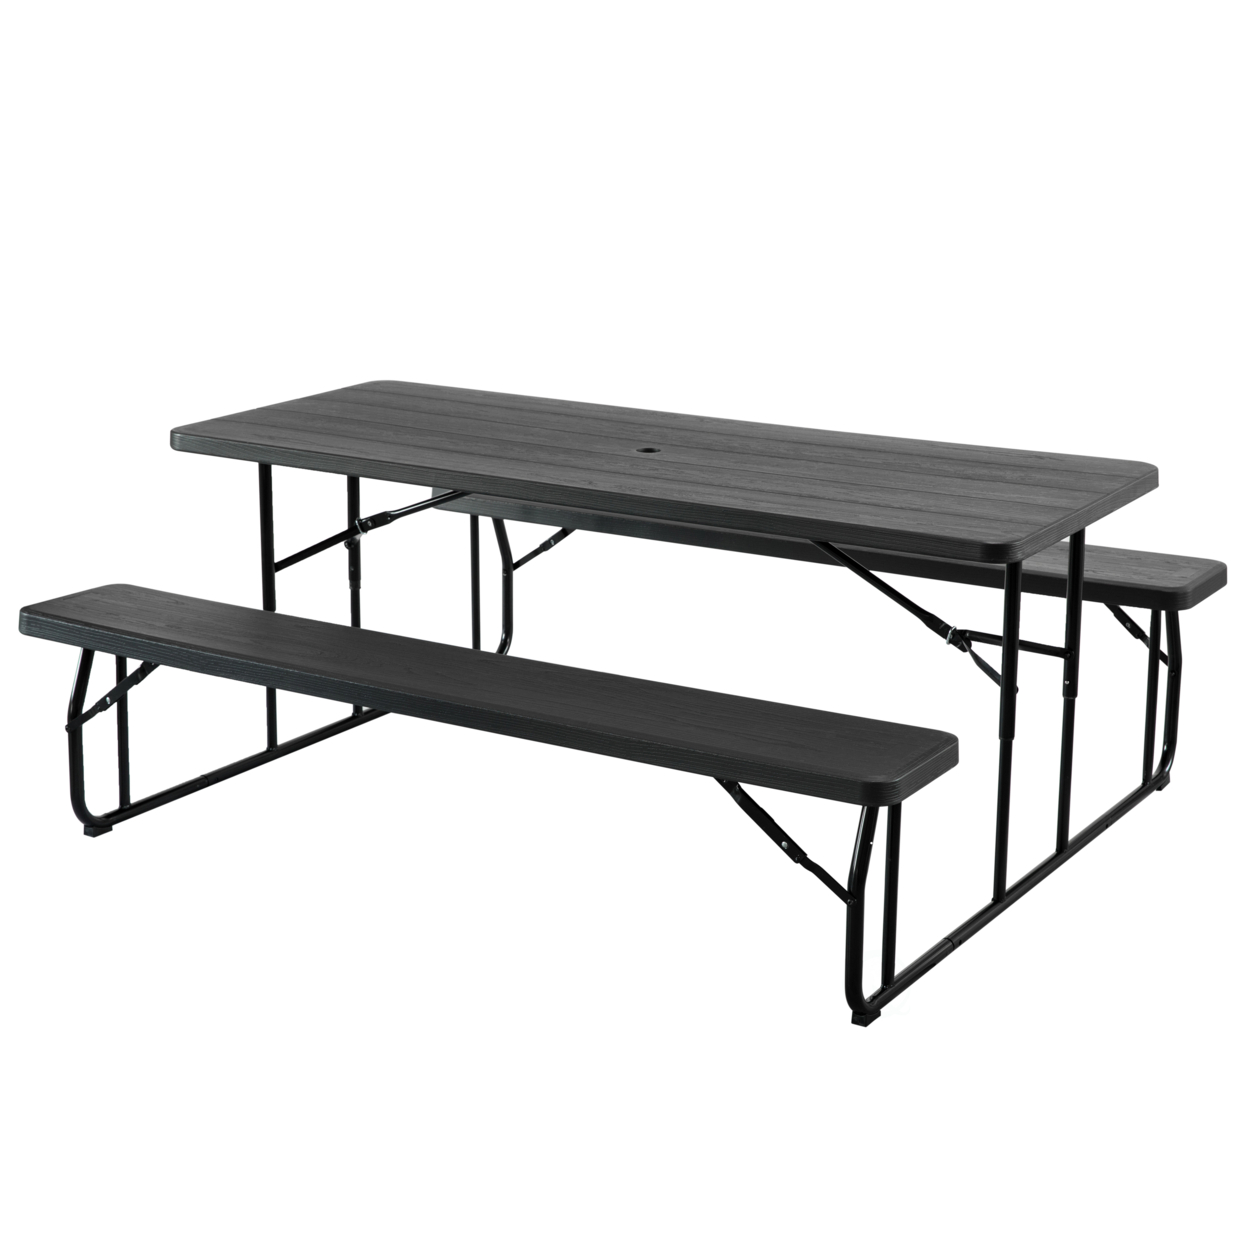 Outdoor Foldable Woodgrain Picnic Table Set With Metal Frame 6 Ft. Black